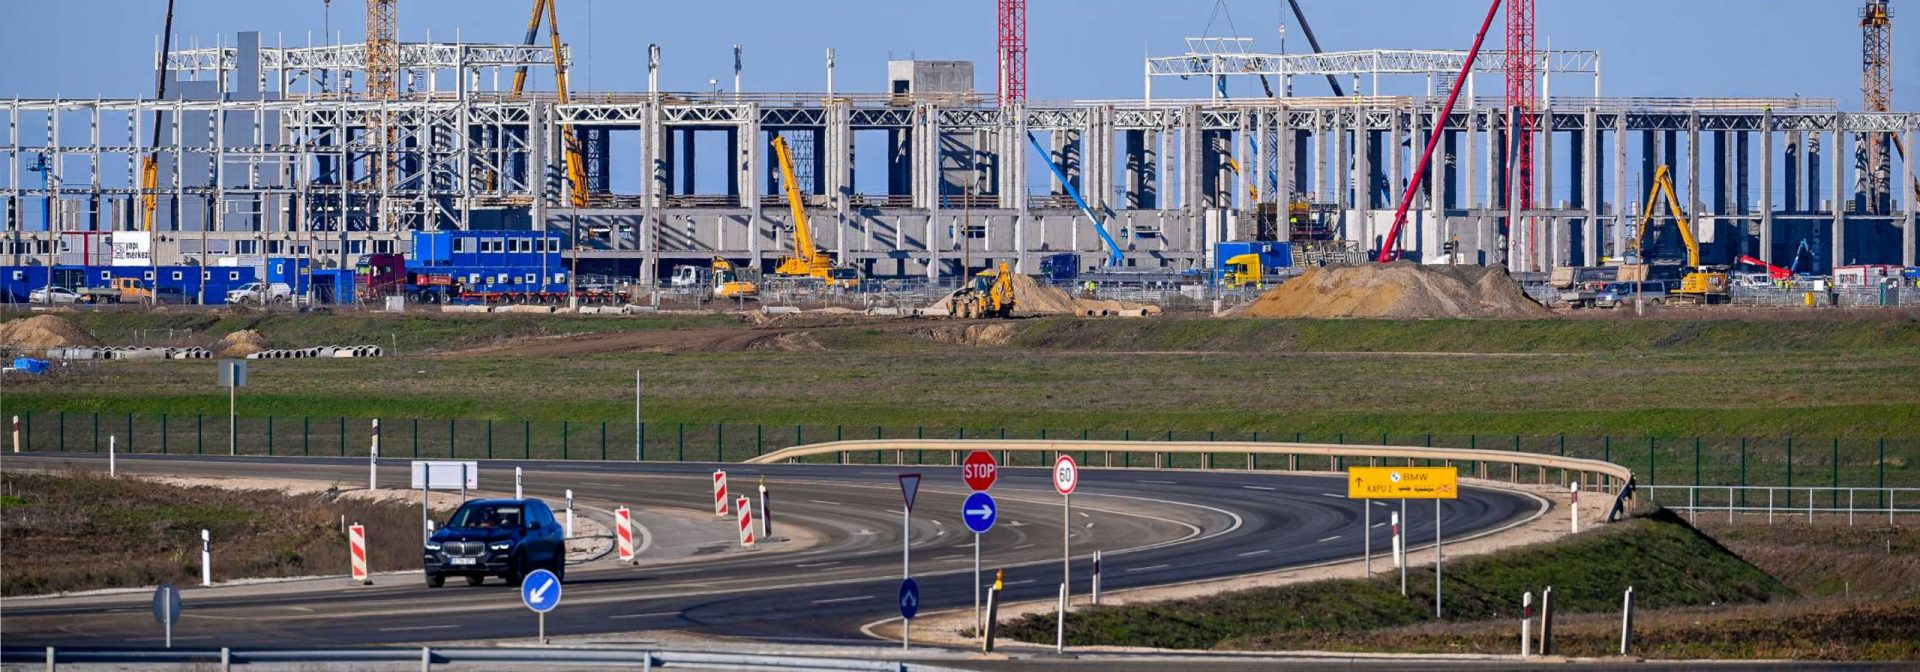 Picture of the BMW Group Plant Construction Site